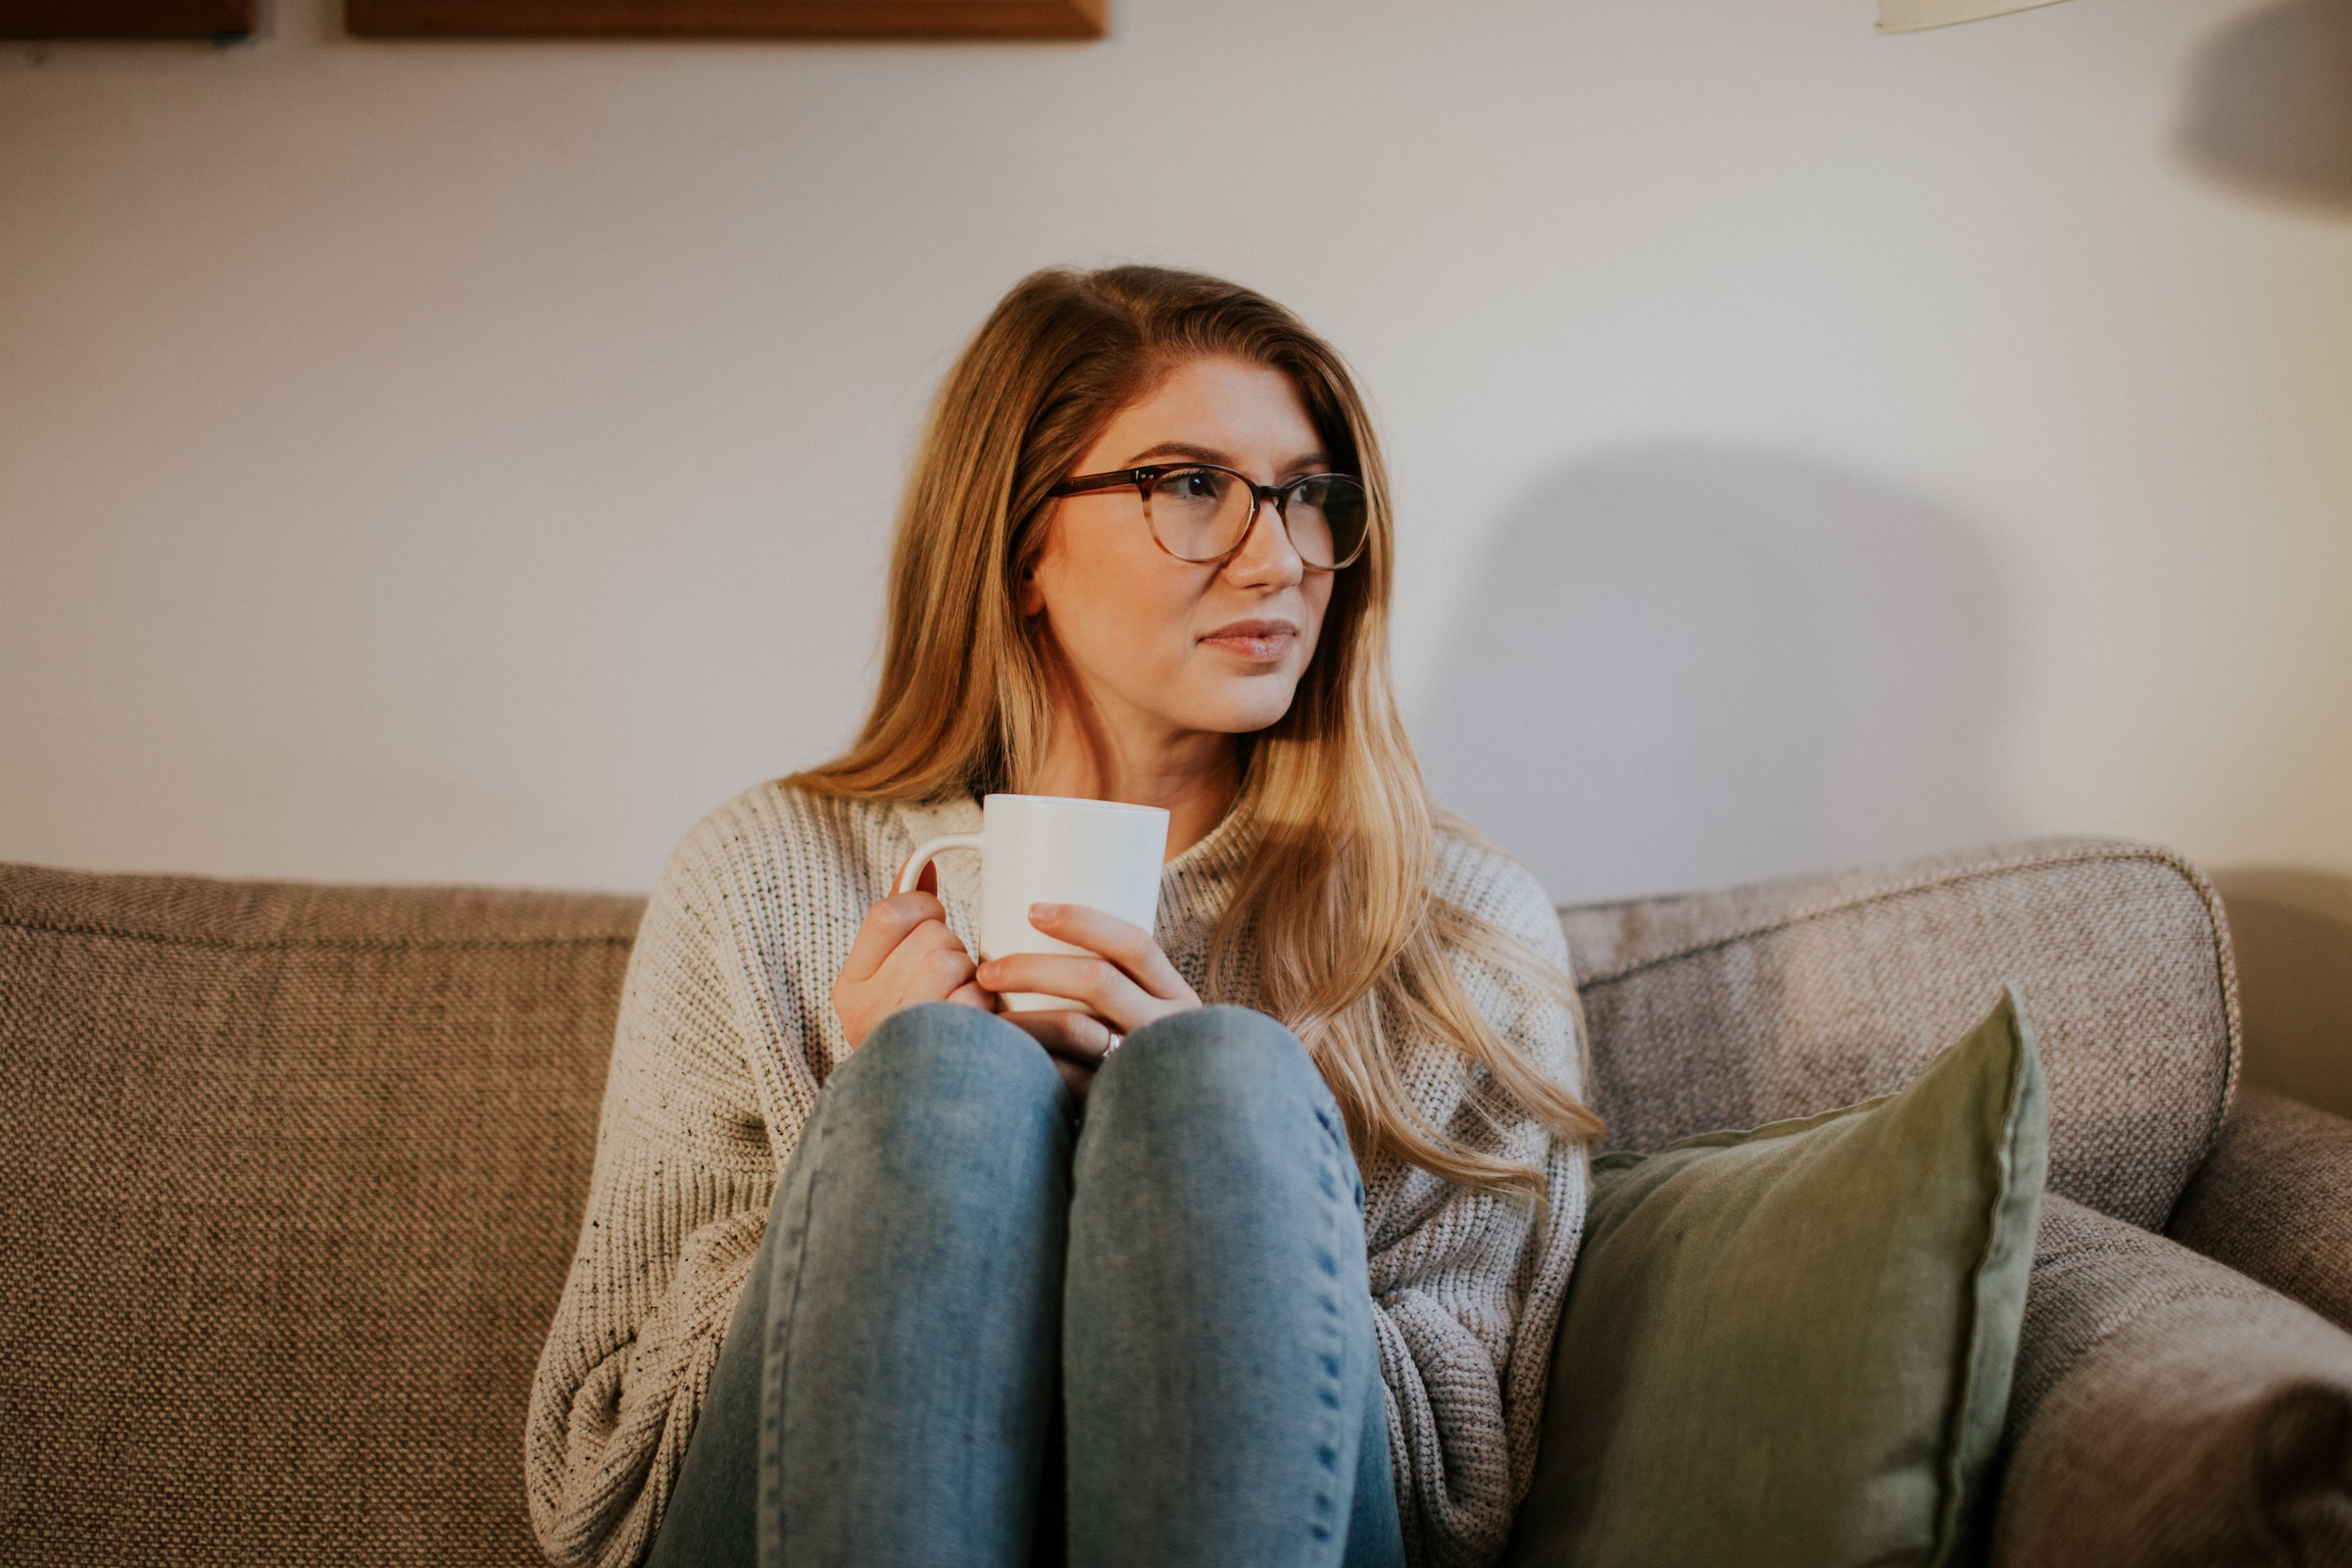 A woman sitting on couch contemplating something | Source: Unsplash